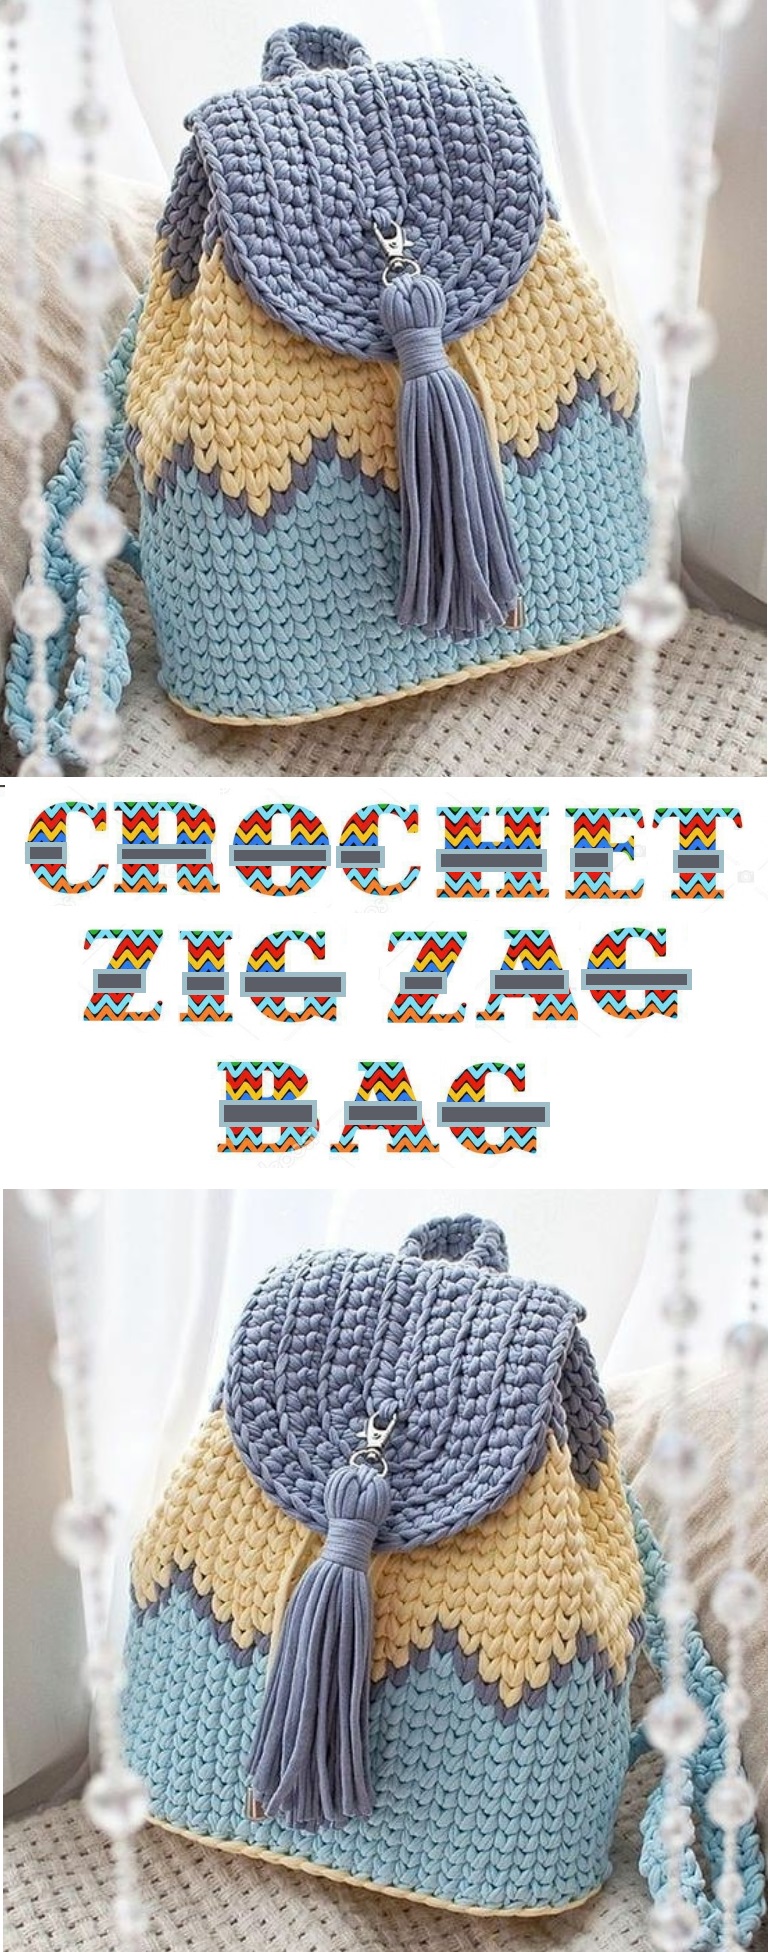 crochet backpack patterns frehow to download odf with adobe acrobat